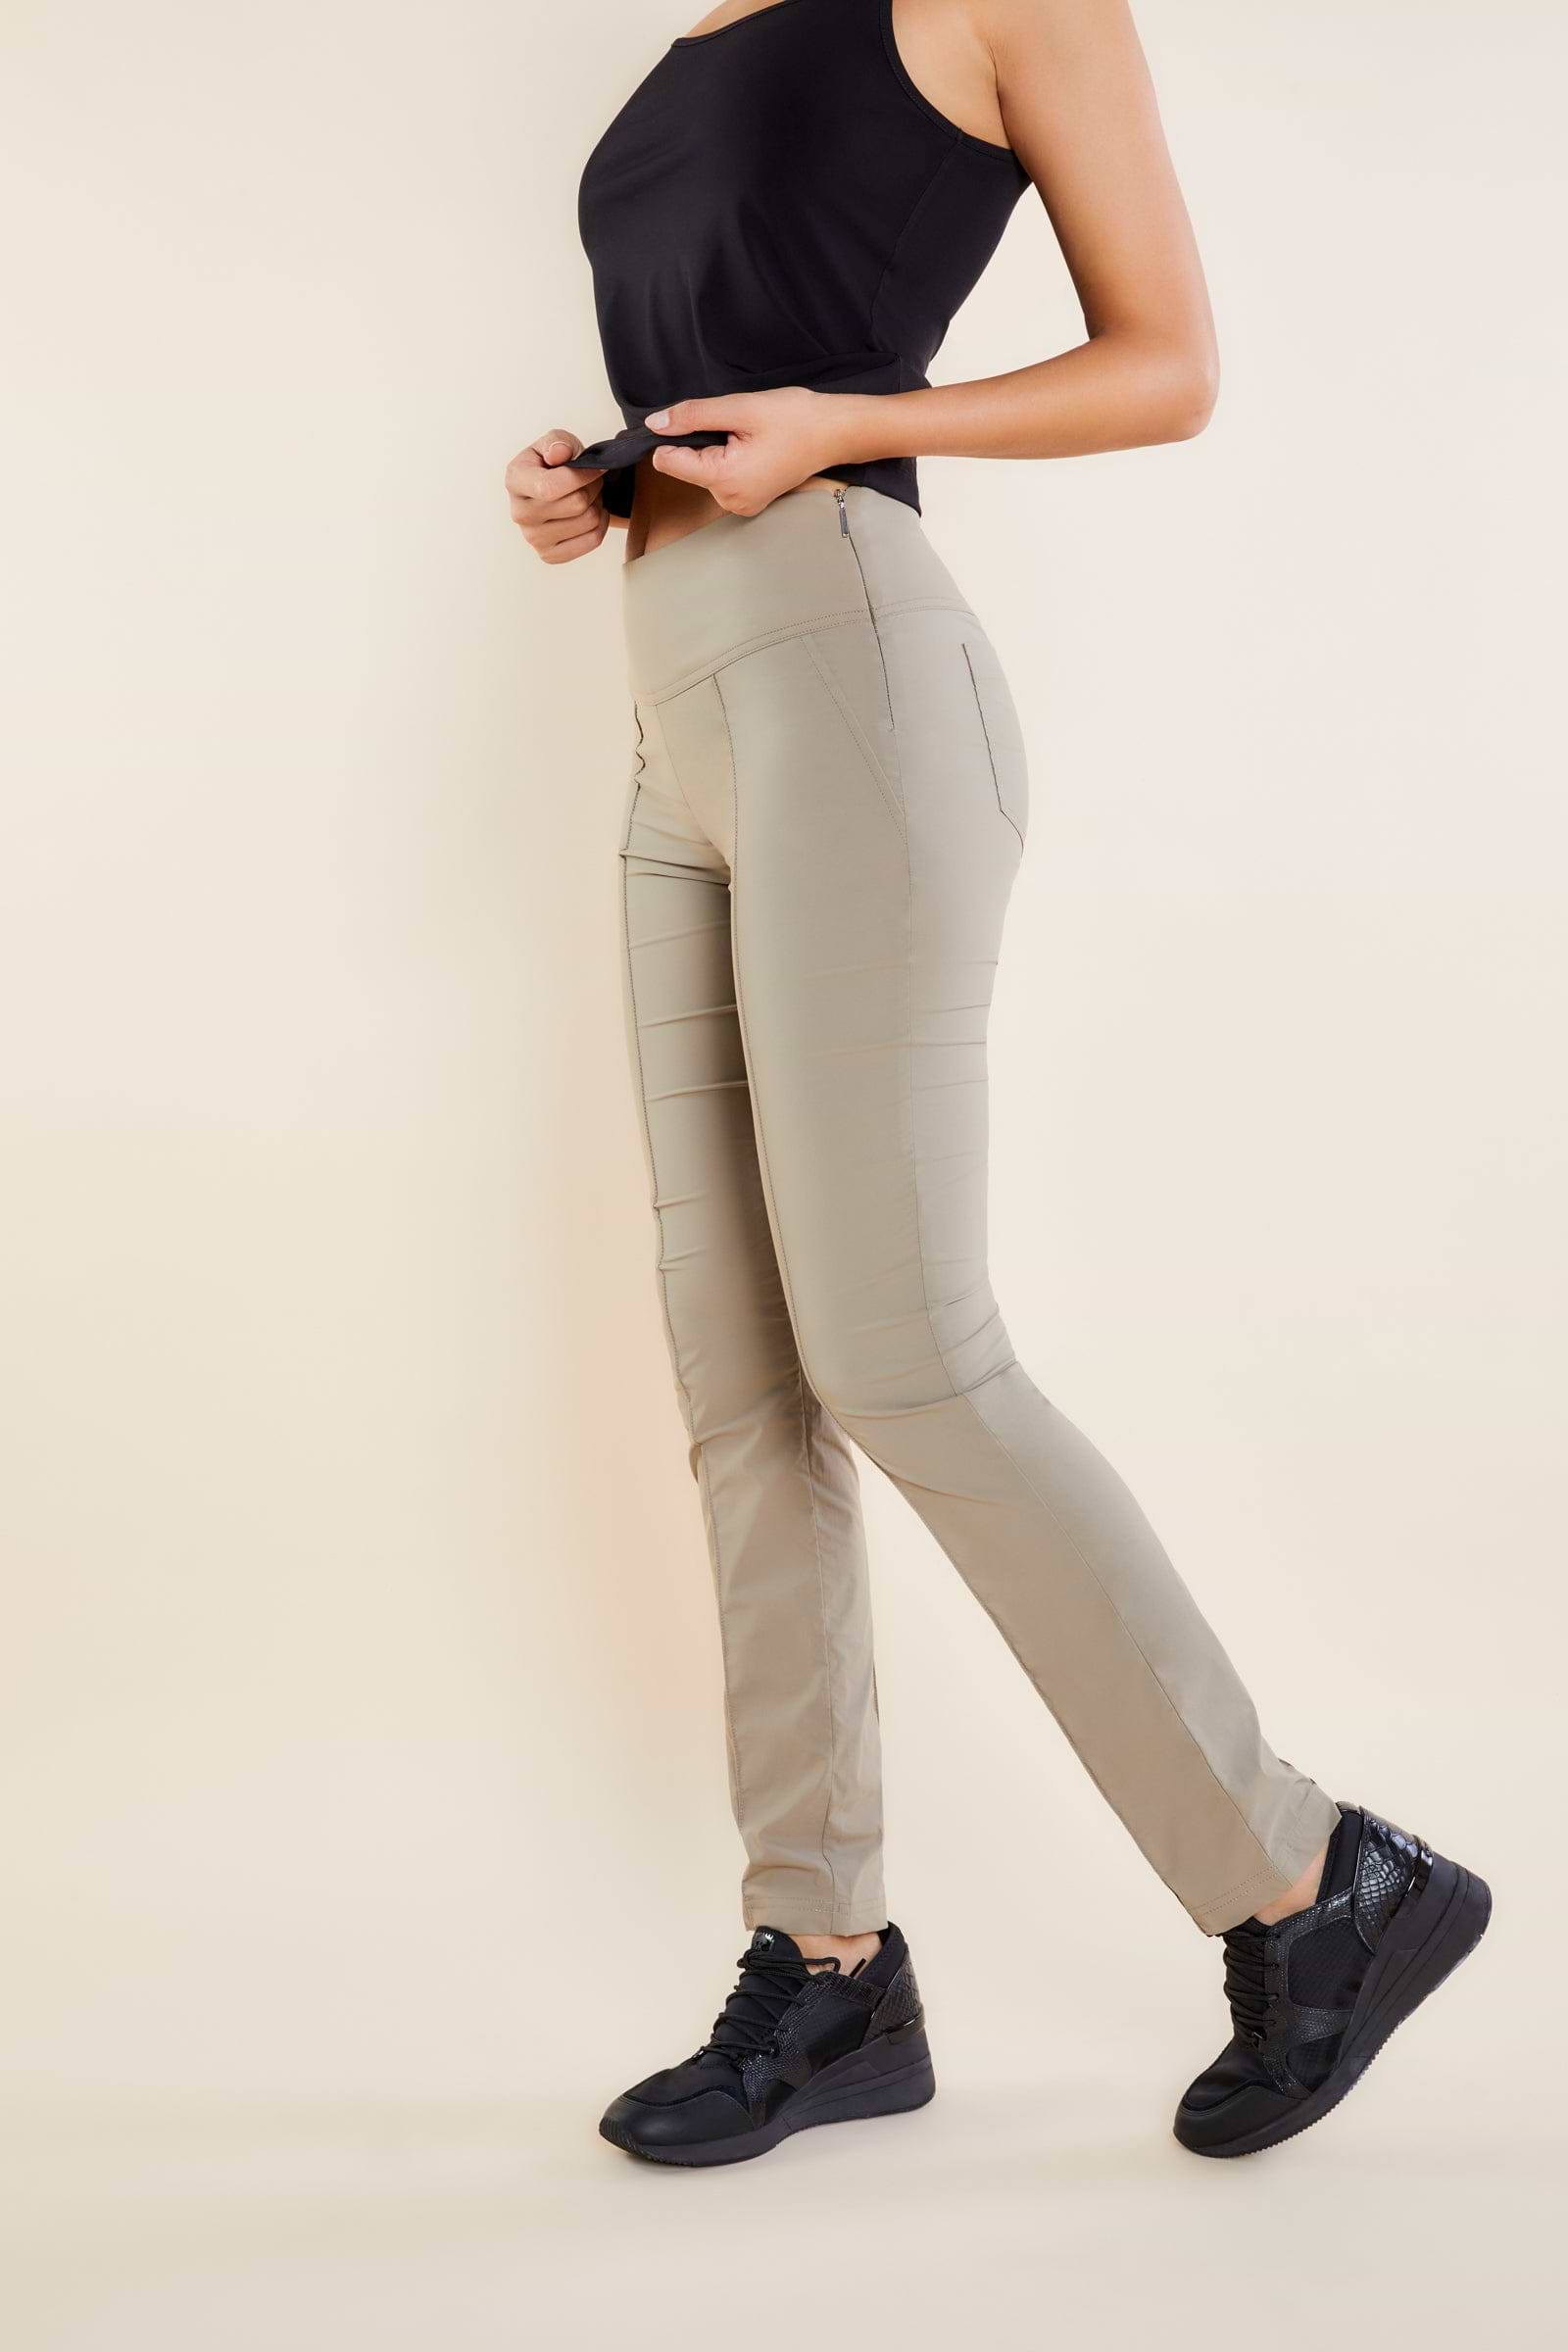 The Best Travel Pants. Side Profile of the Sonia Curvy High Rise Pant in Khaki